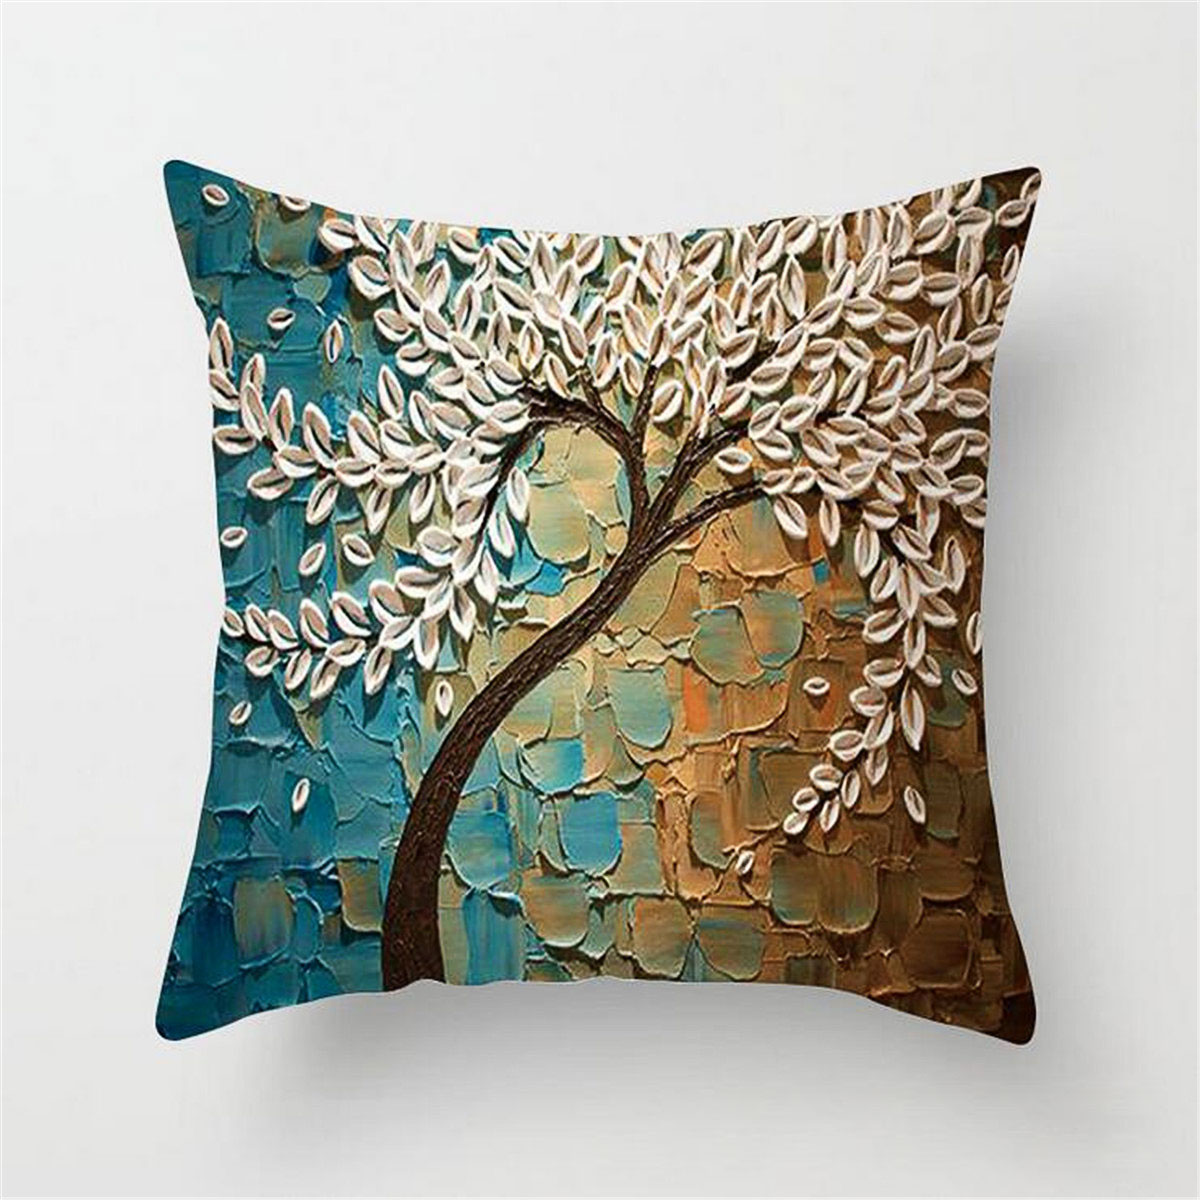 Flowers Abstract Pattern Cushion Cover Throw Pillow Case Sofa Bed Home Decor New